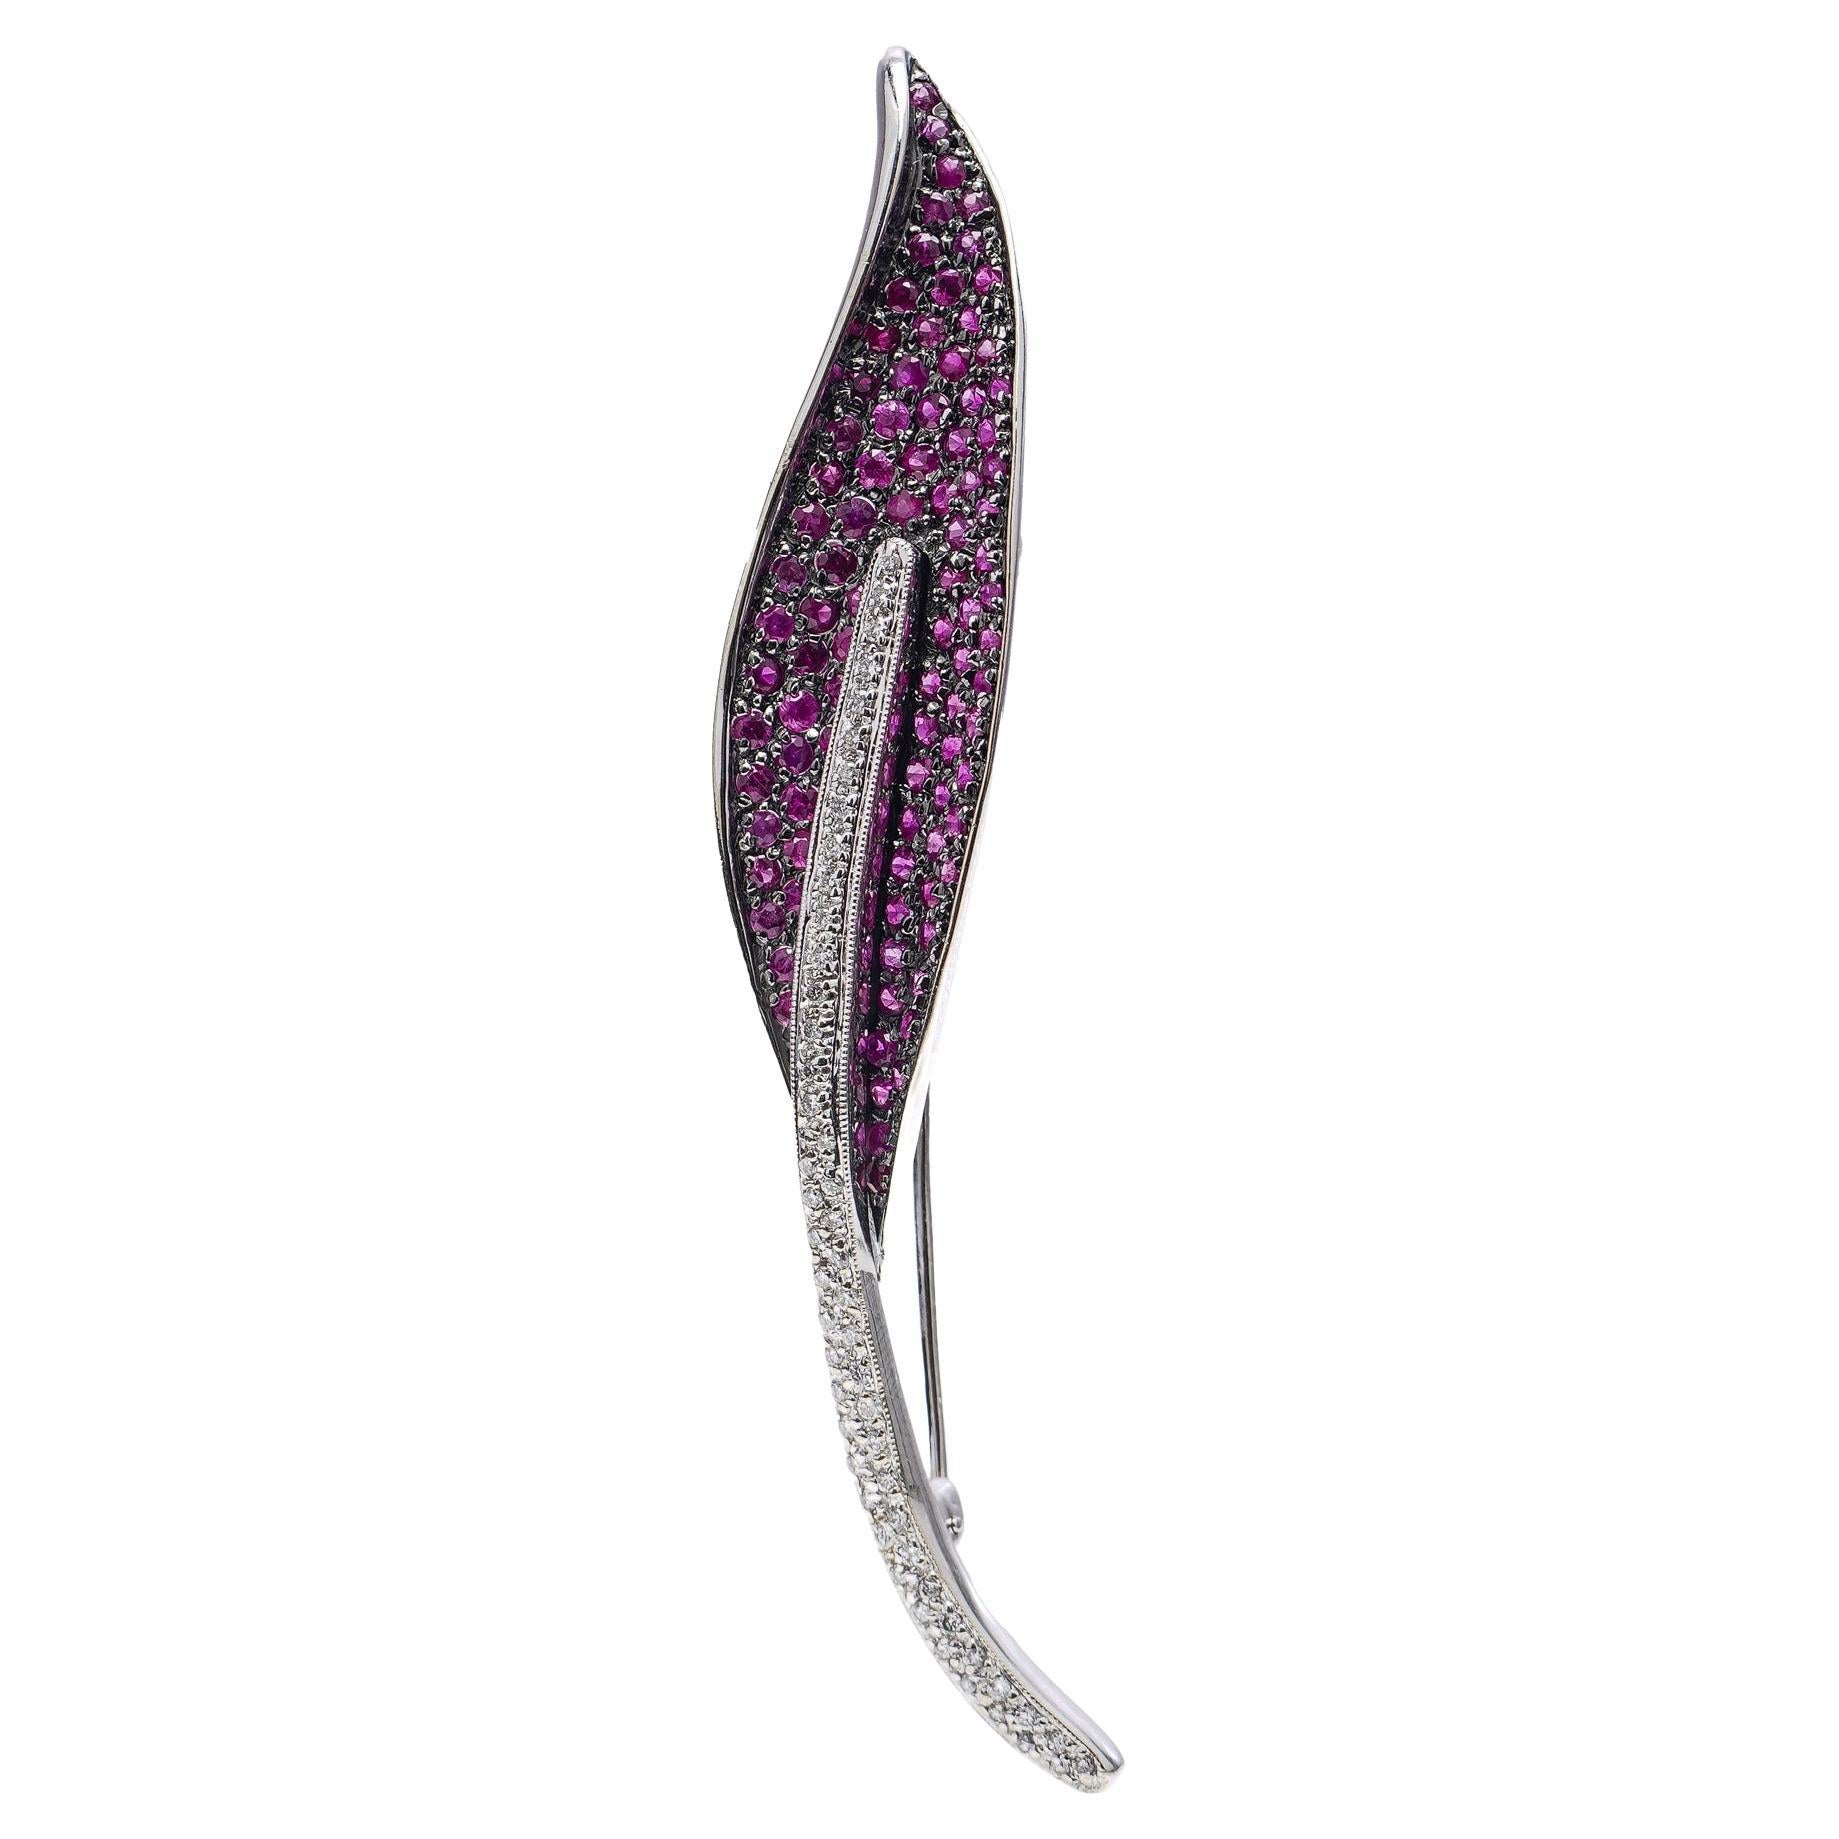 Vintage 18kt. white leaf-shaped brooch, set with rubies and diamonds